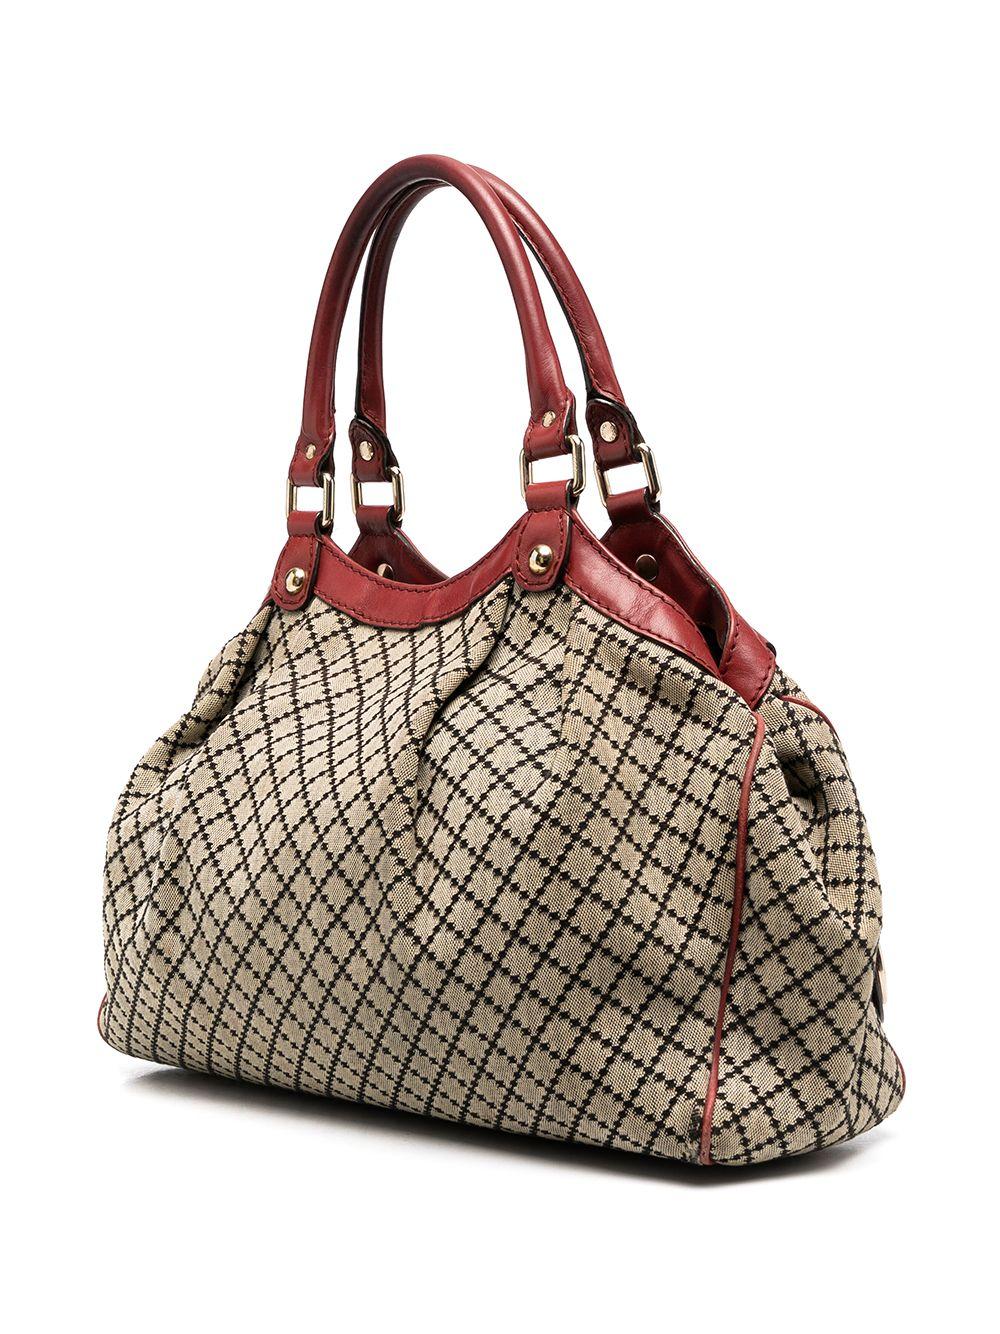 Beige Sukey Gucci canvas & leather tote bag featuring red leather parts, an argyle check pattern, free leather logo Double G charm detail, inside zip pocket and an internal logo stamp.  
 Hauteur	16.9in (43cm)
Largeur	16.9in (43cm)
Width 2.7in